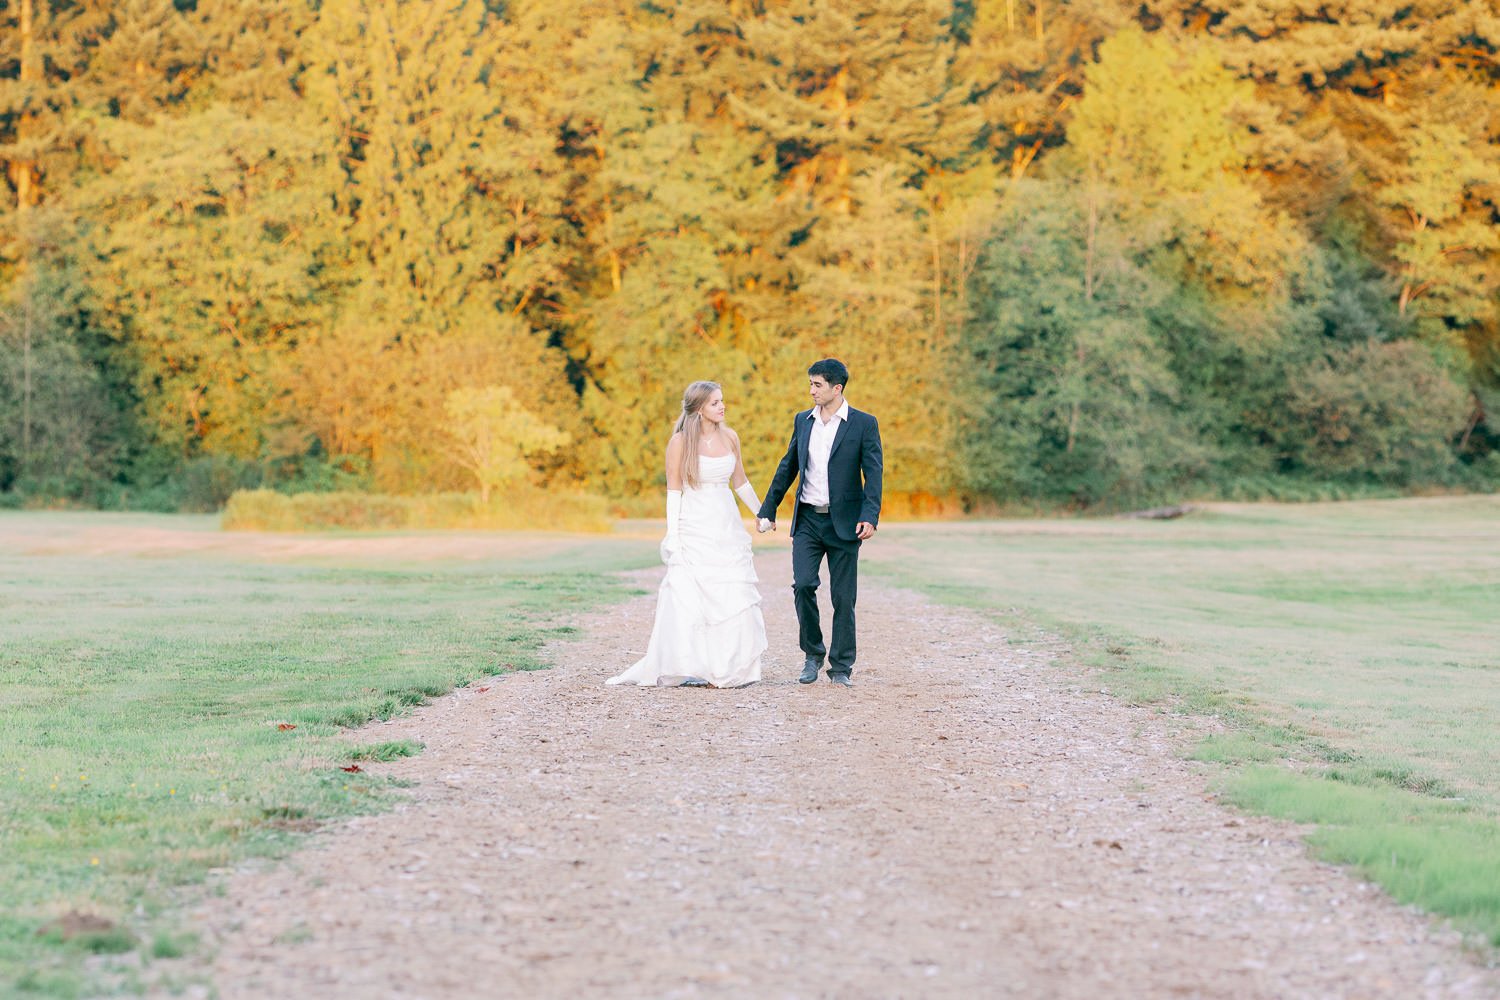 Wedding Photographer In Vancouver, Campbell Valley Park